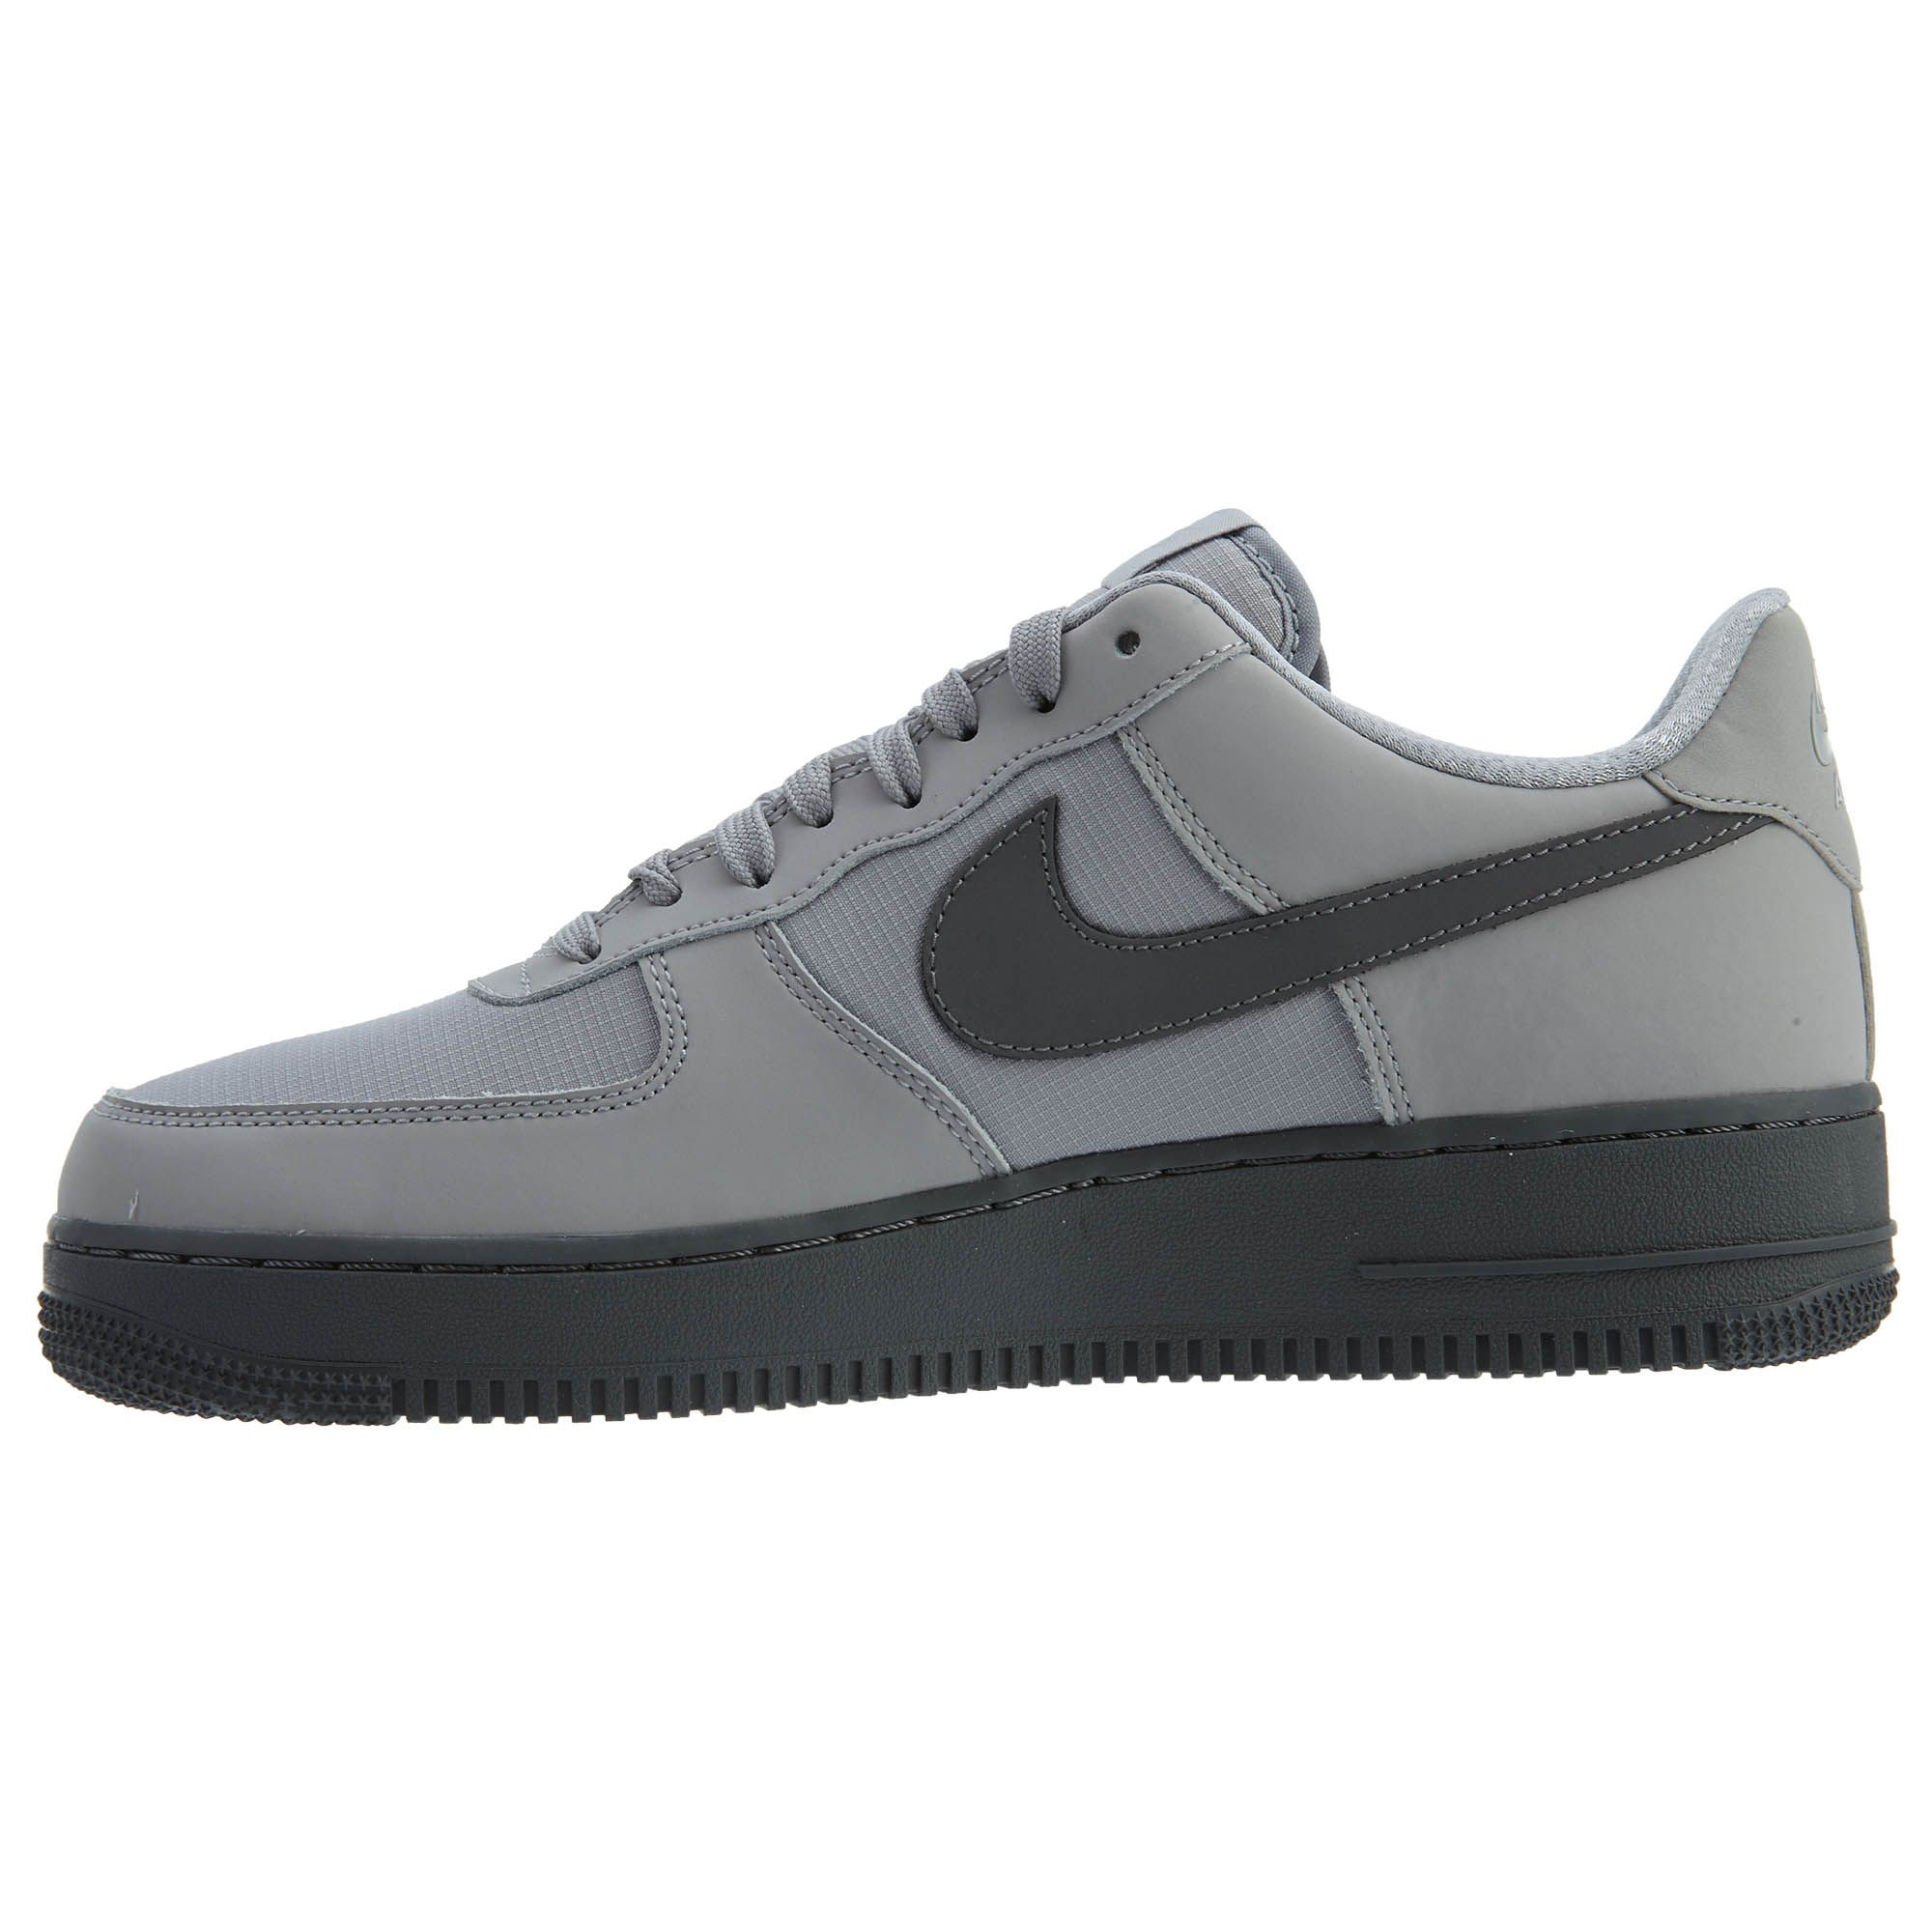 Nike Air Force 1 '07 Txt Mens Style 